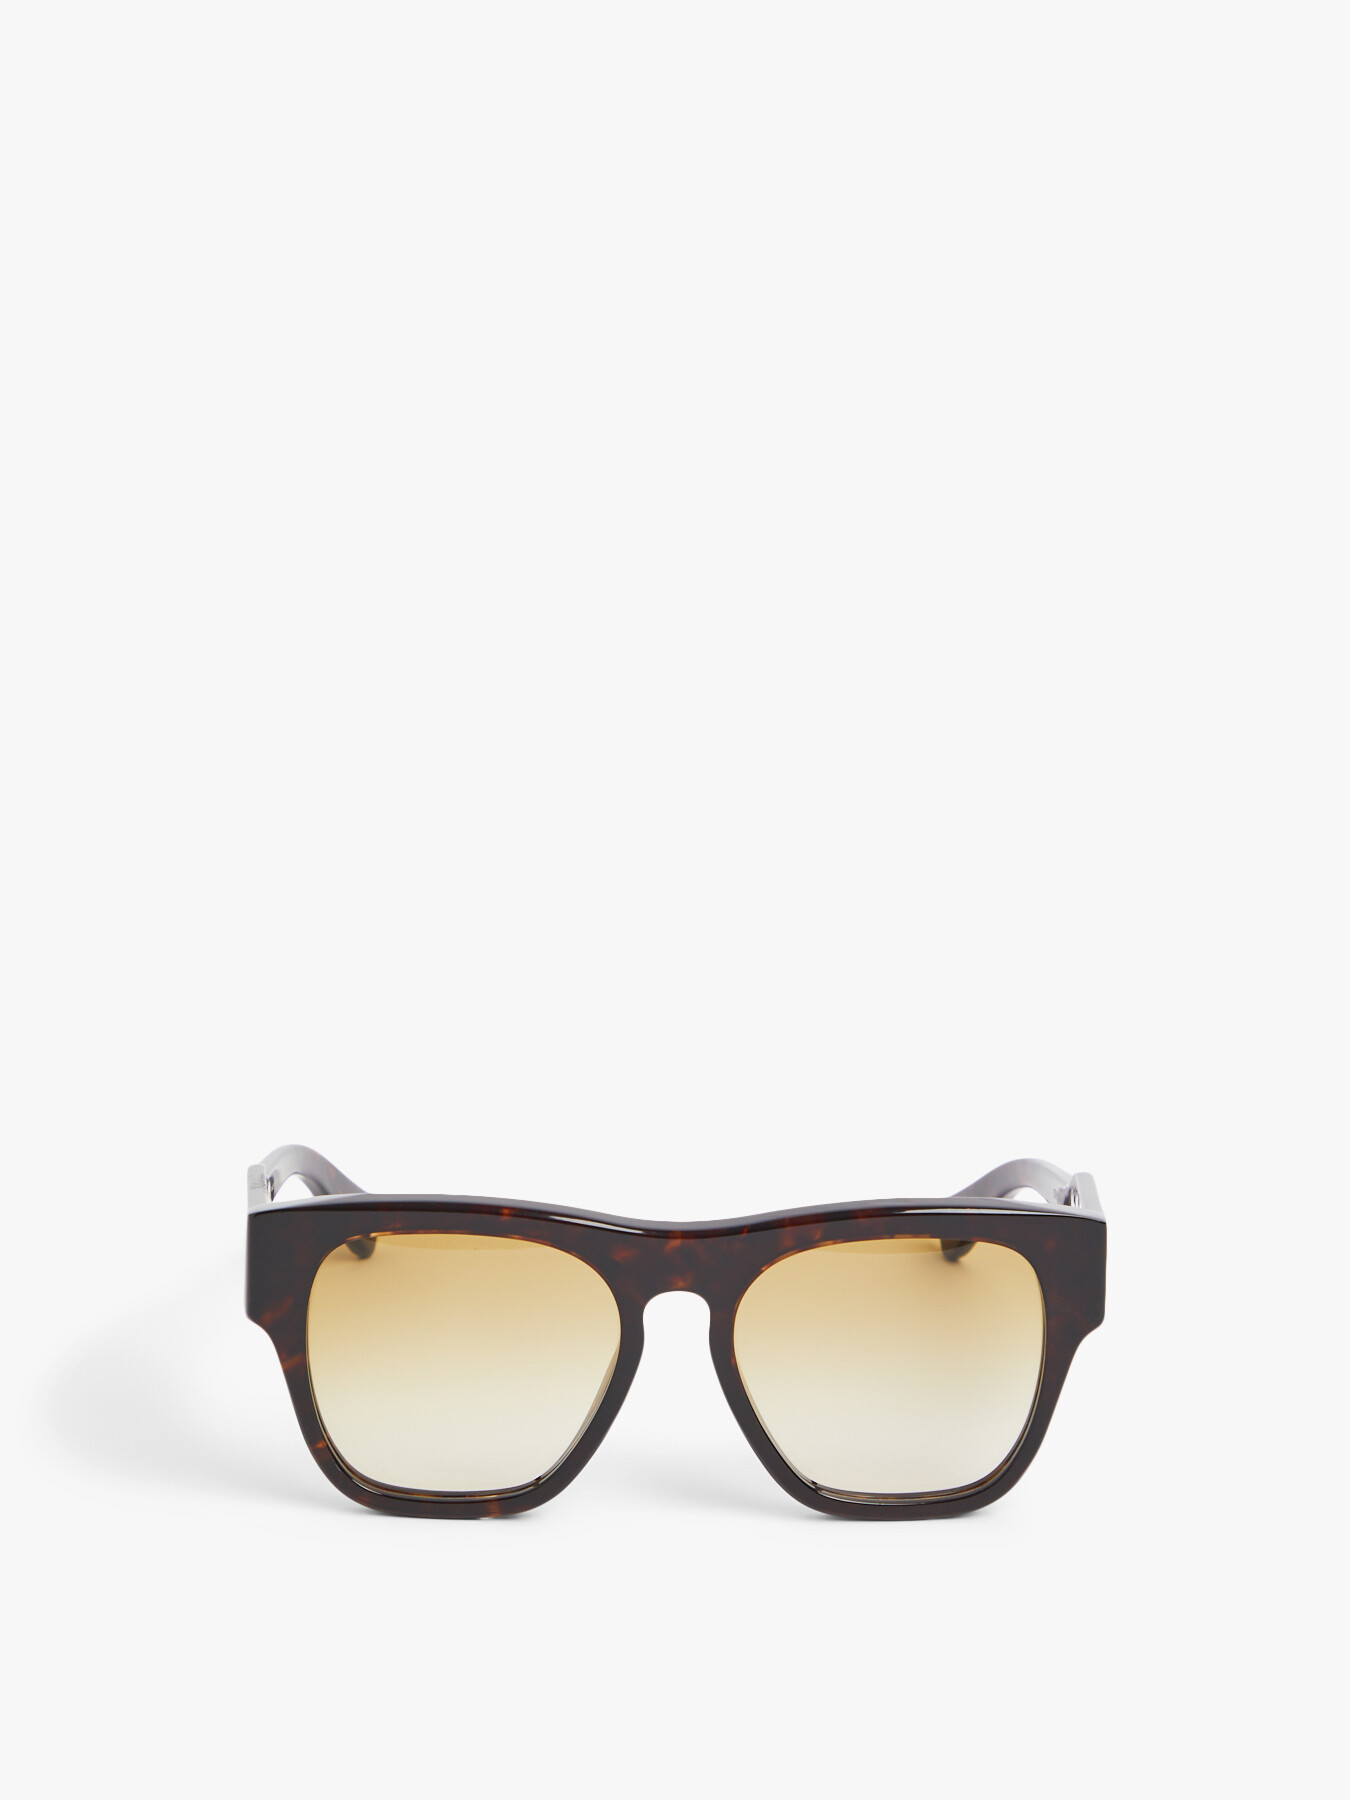 Chloé Women's Oversized Recycled Acetate Sunglasses Brown